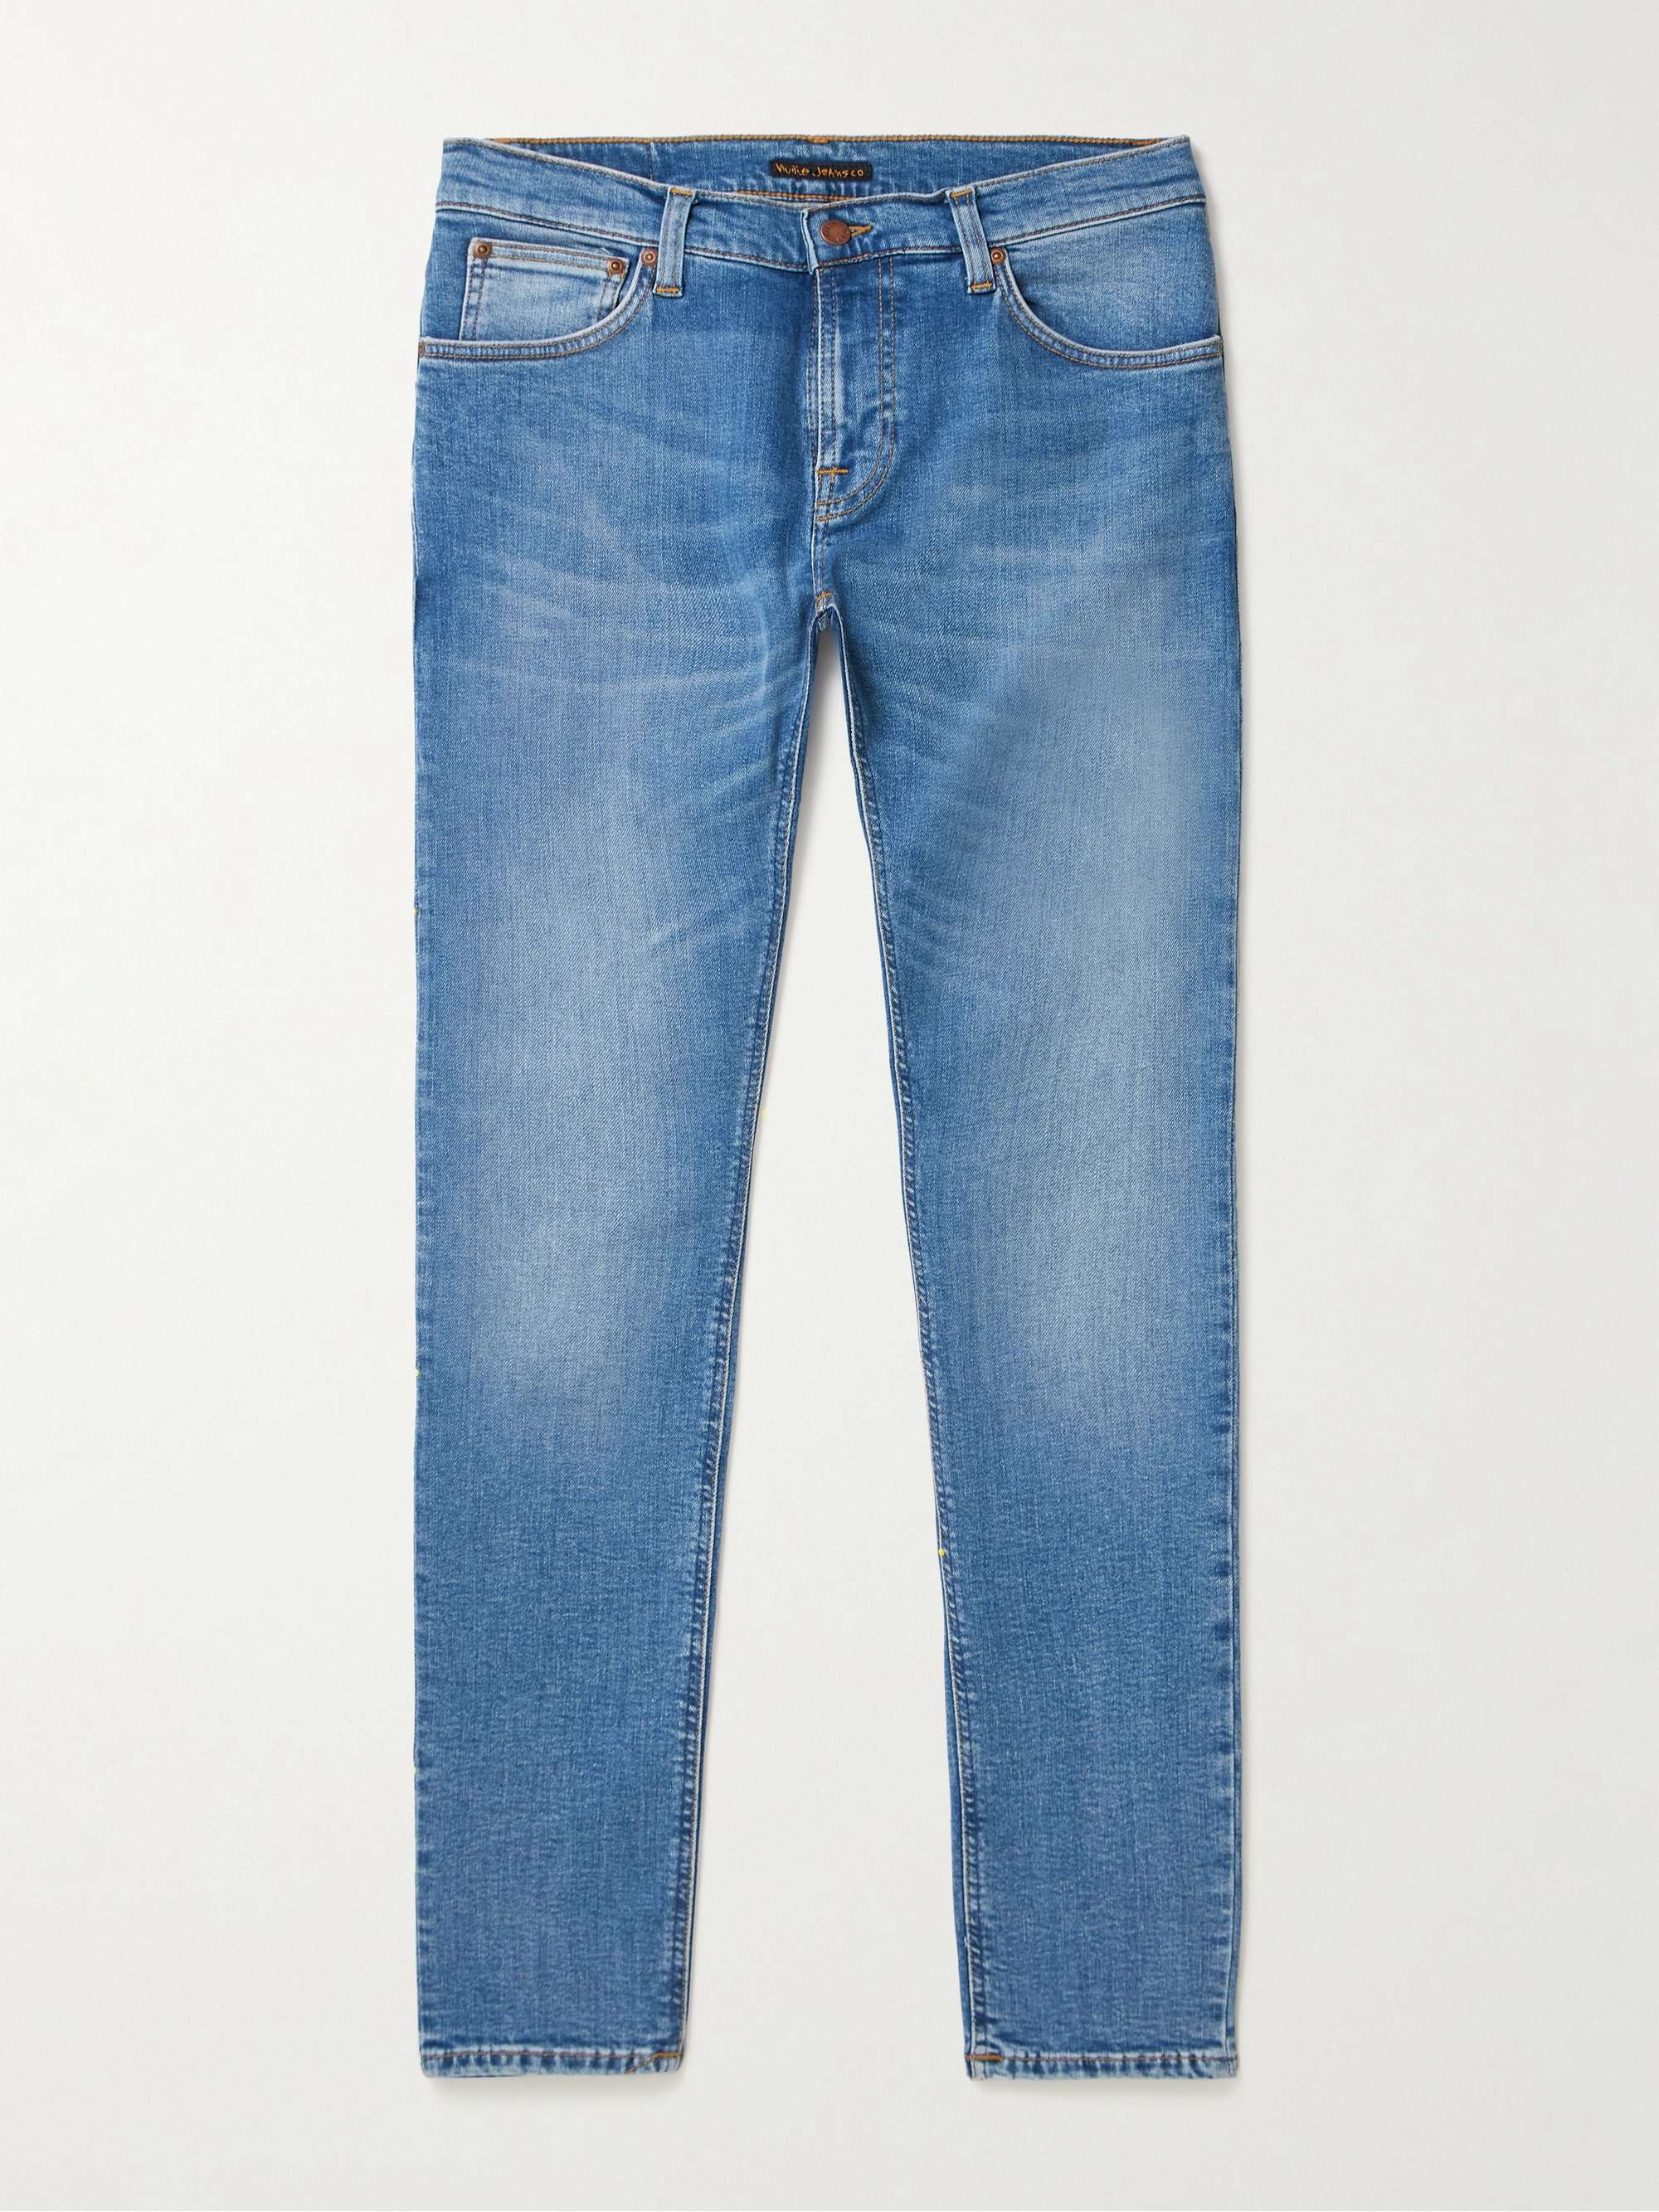 NUDIE JEANS Tight Terry Slim-Fit Jeans for Men | MR PORTER